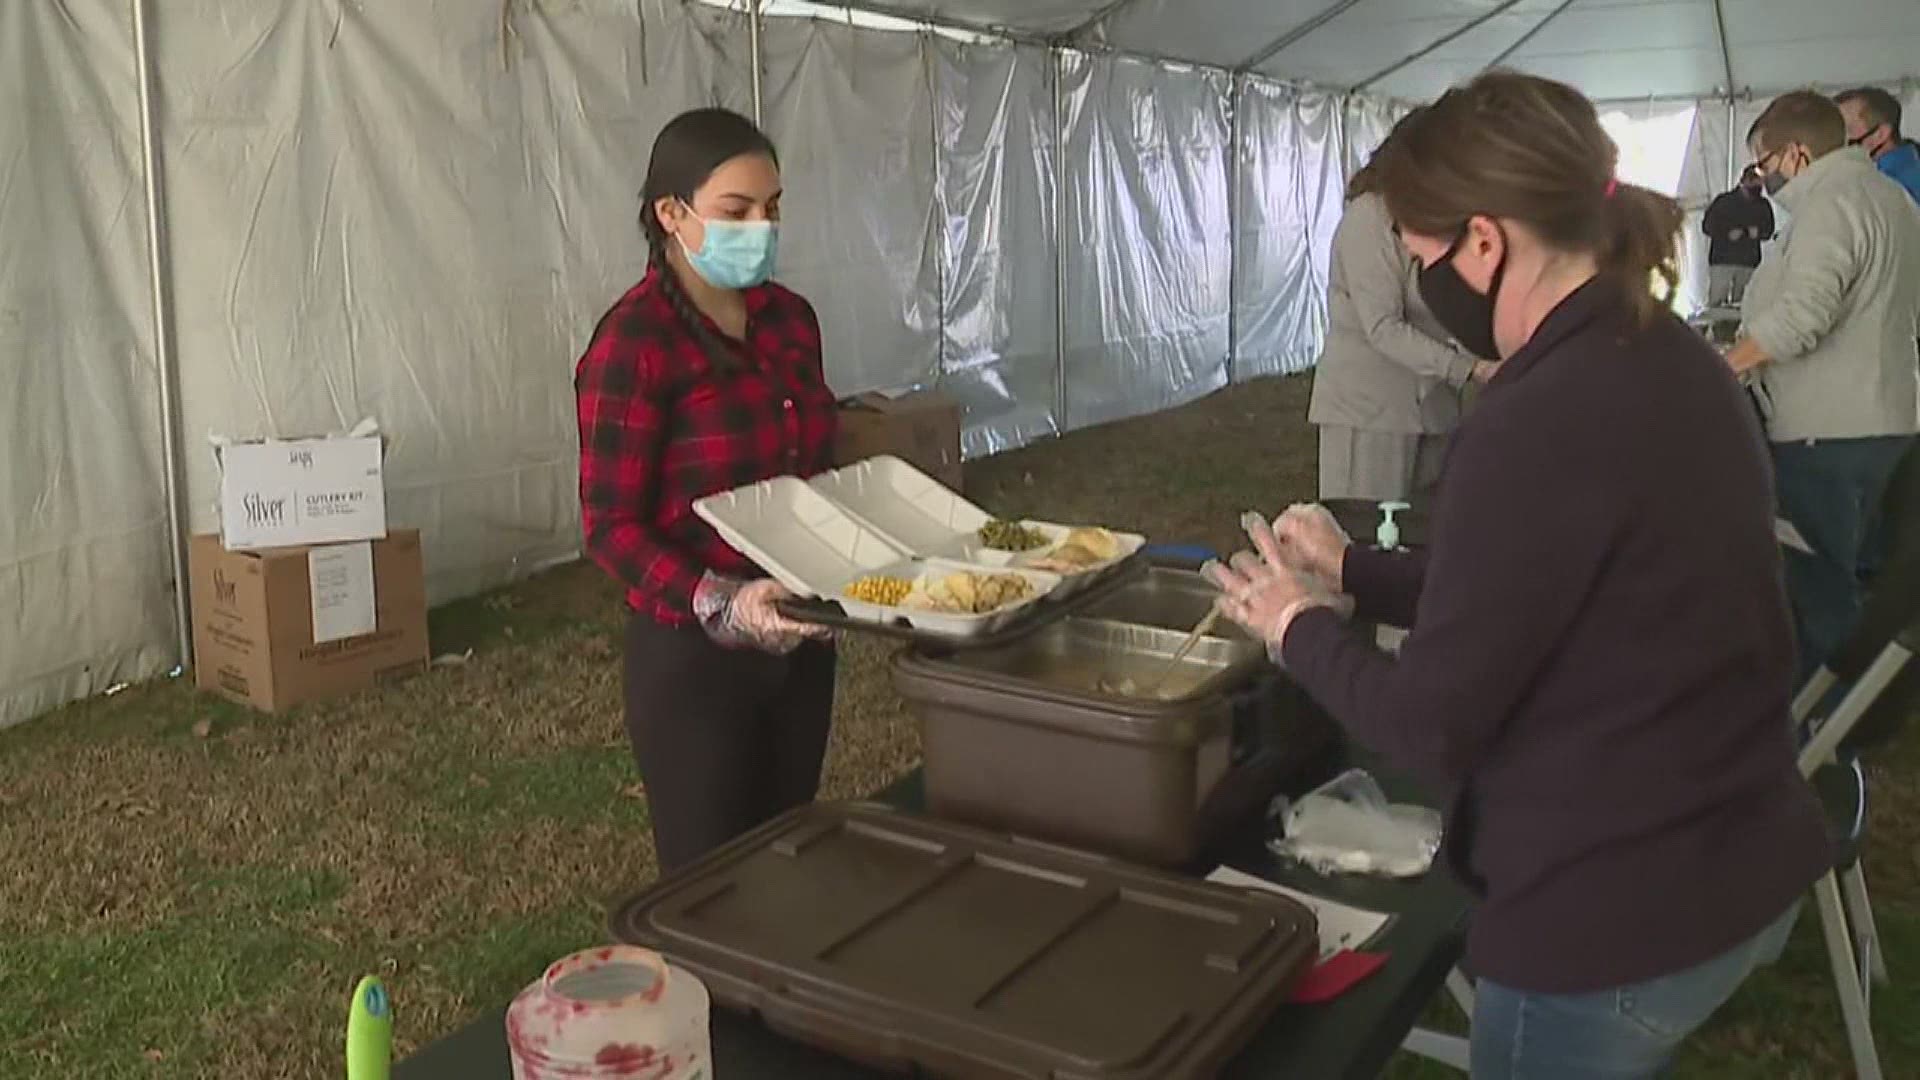 Project Now and the MLK Jr. Center are looking to give away 3,000 meals.